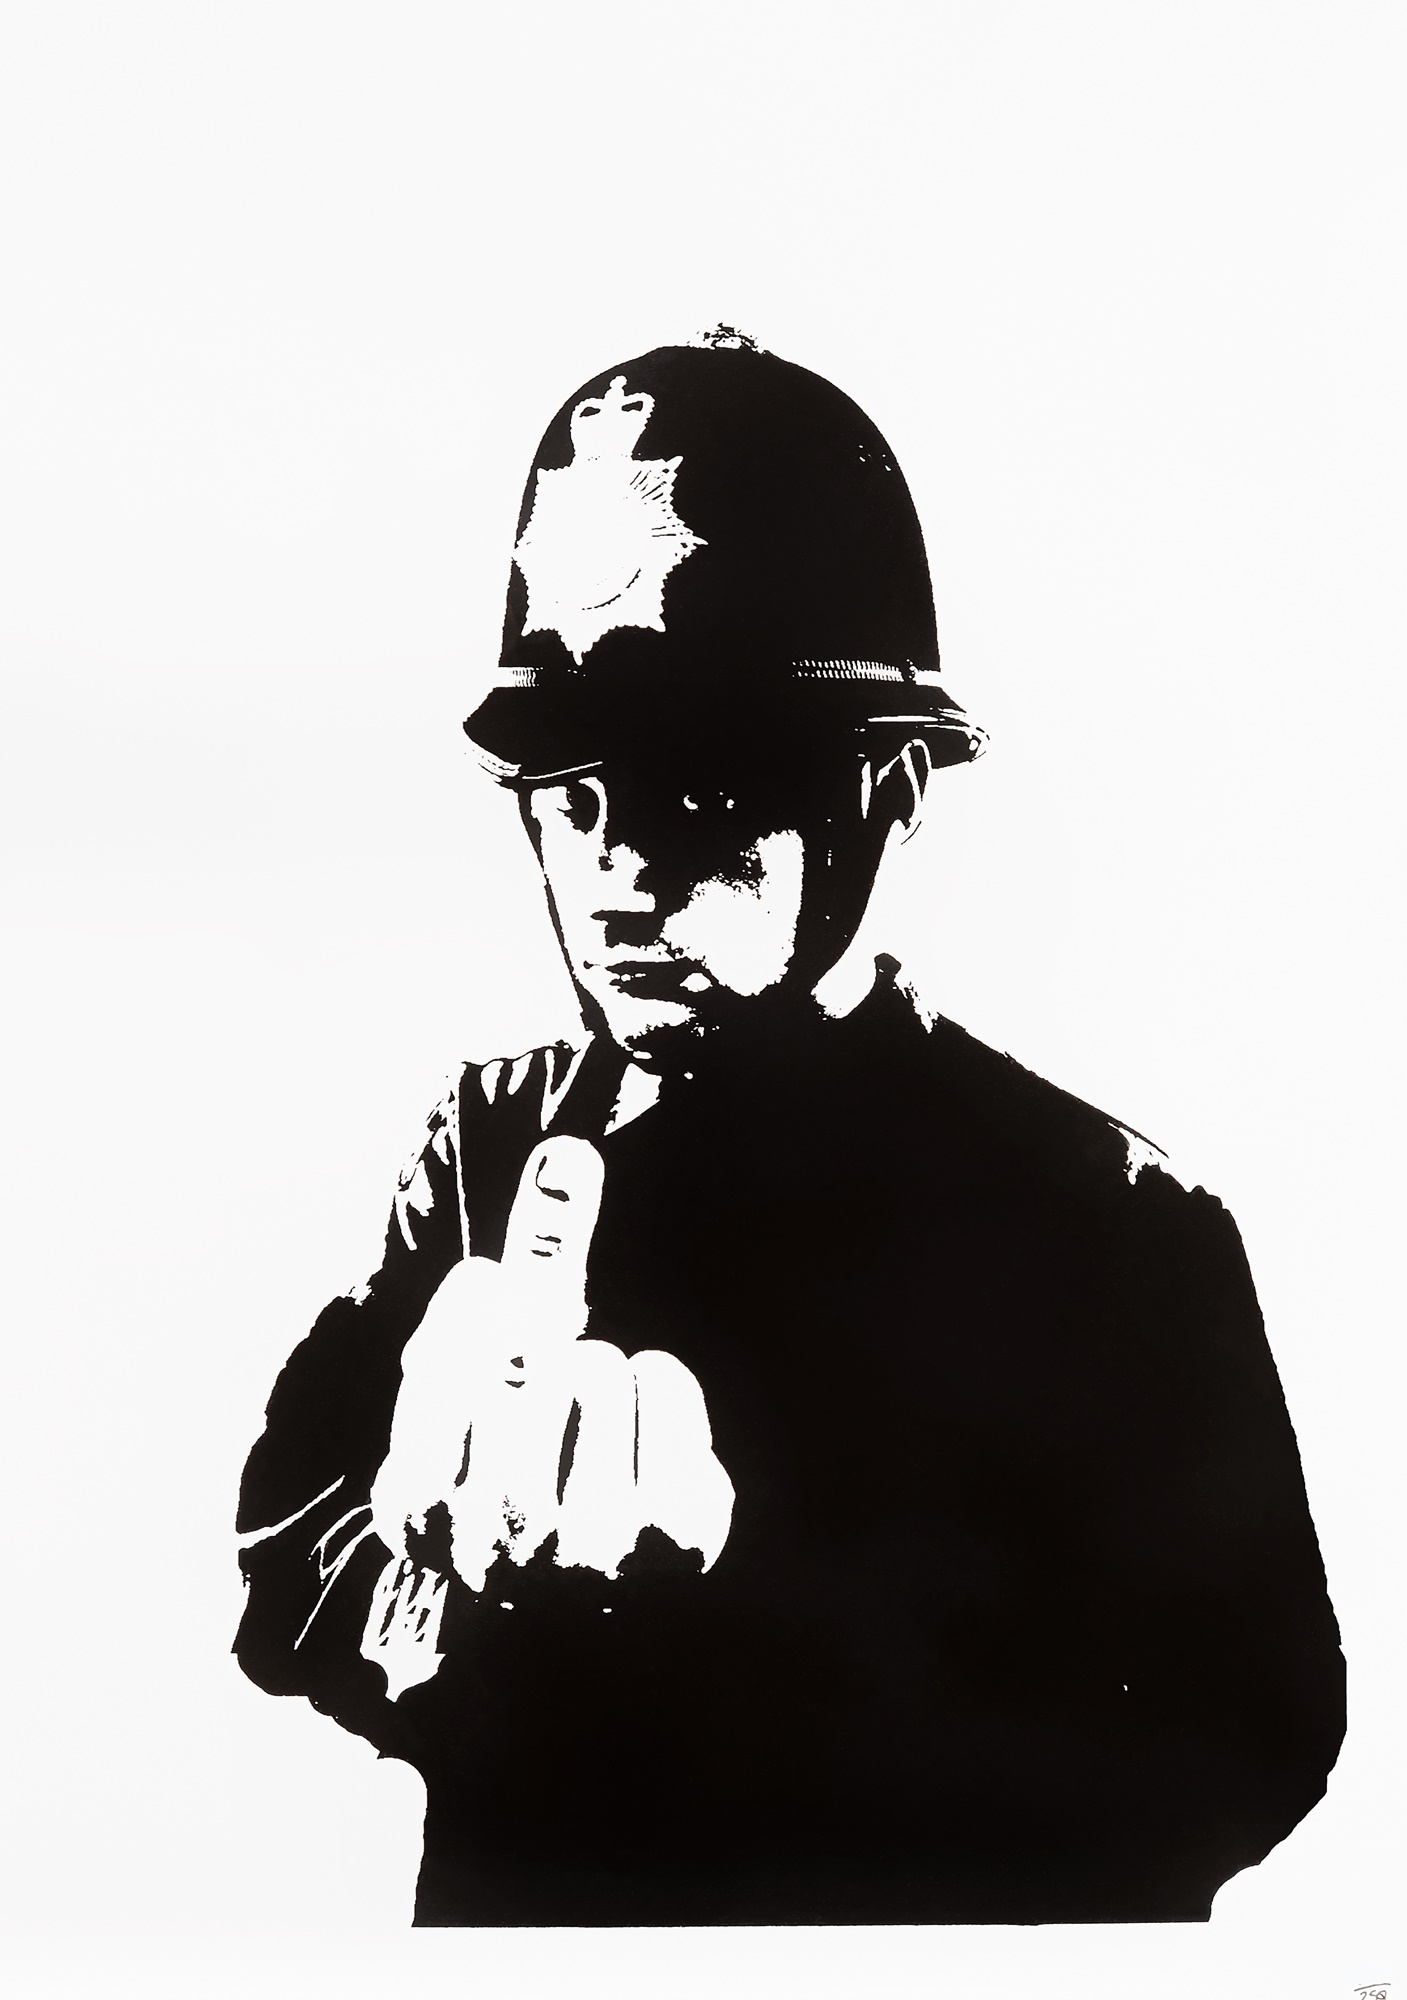 Rude Copper, 2002 - Banksy Explained